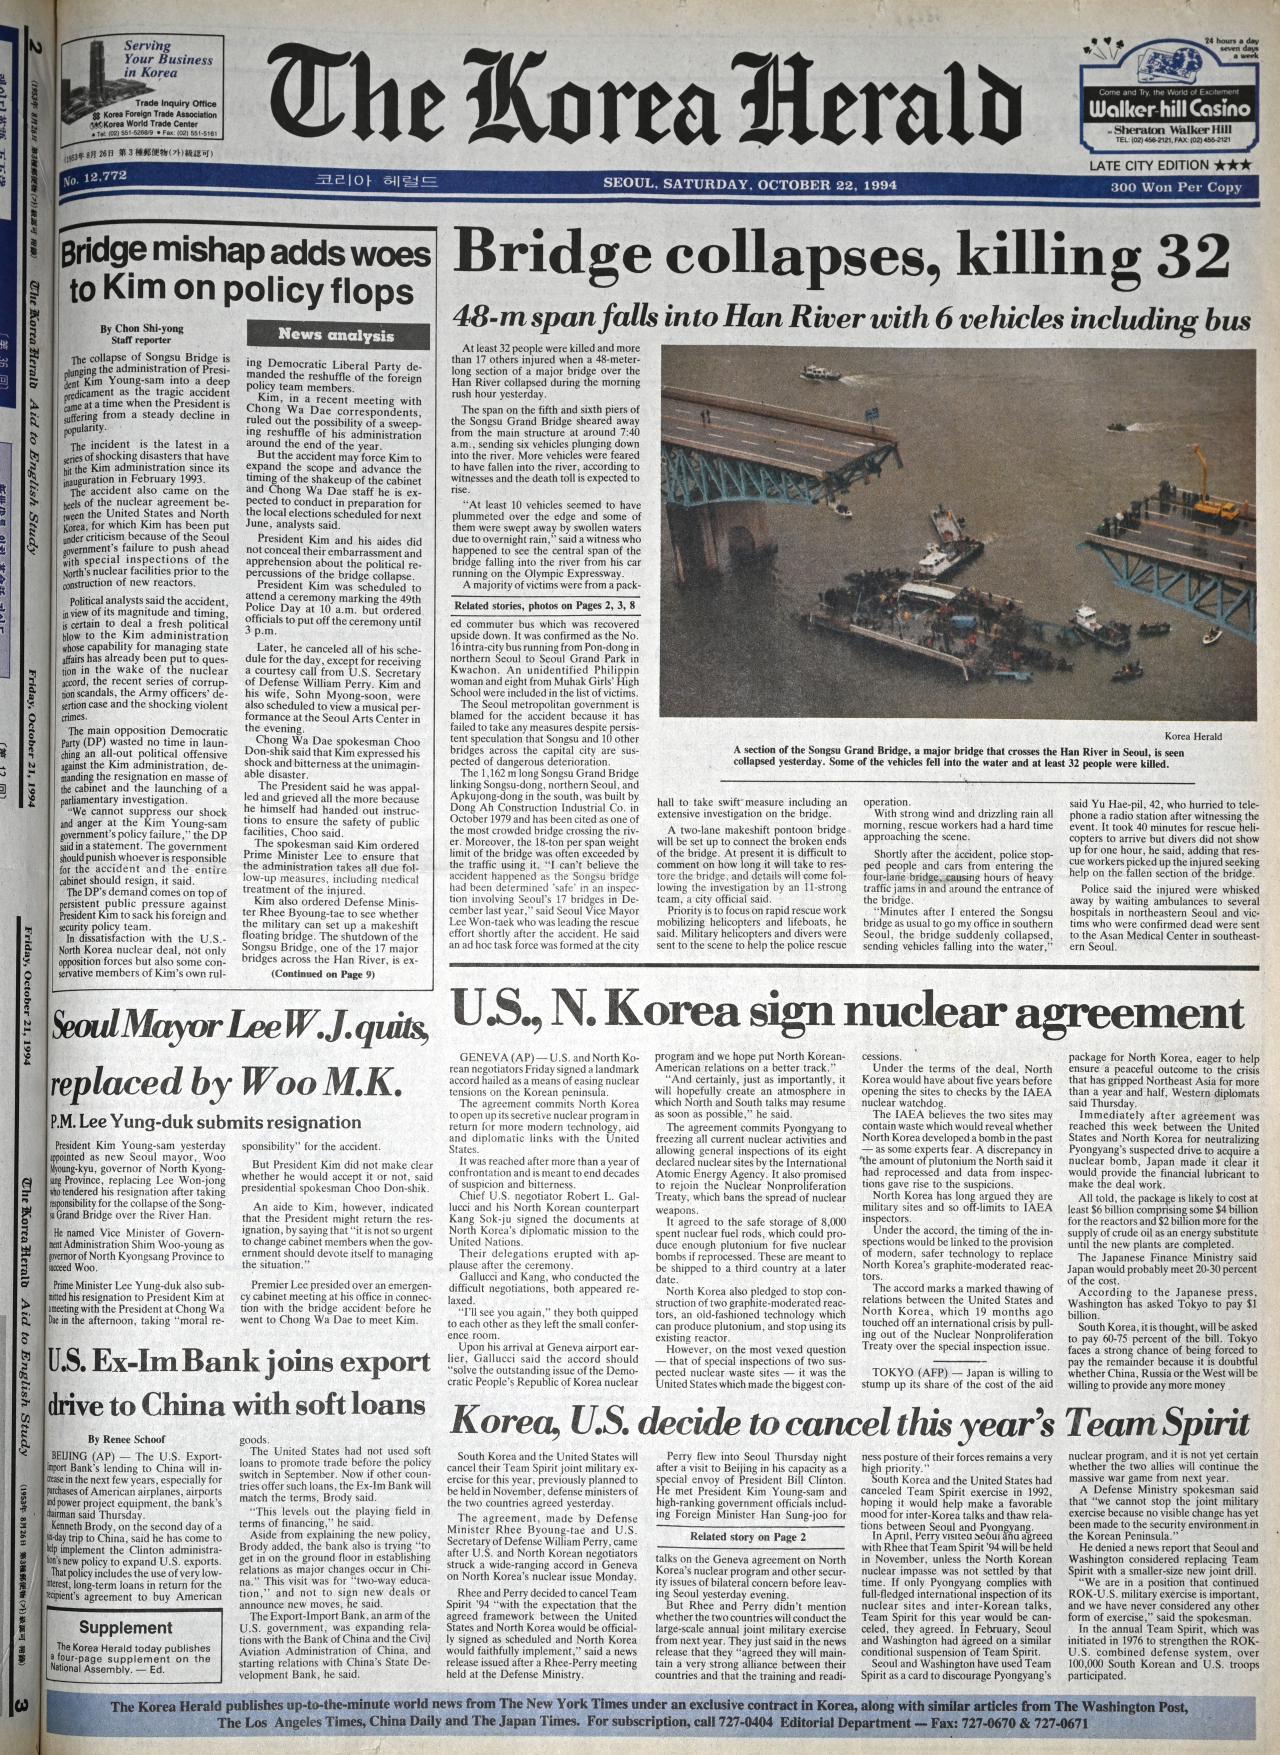 The front page of The Korea Herald's Oct. 22, 1994 edition tells the story of how the Seongsu Bridge collapsed and killed 32. (The Korea Herald)